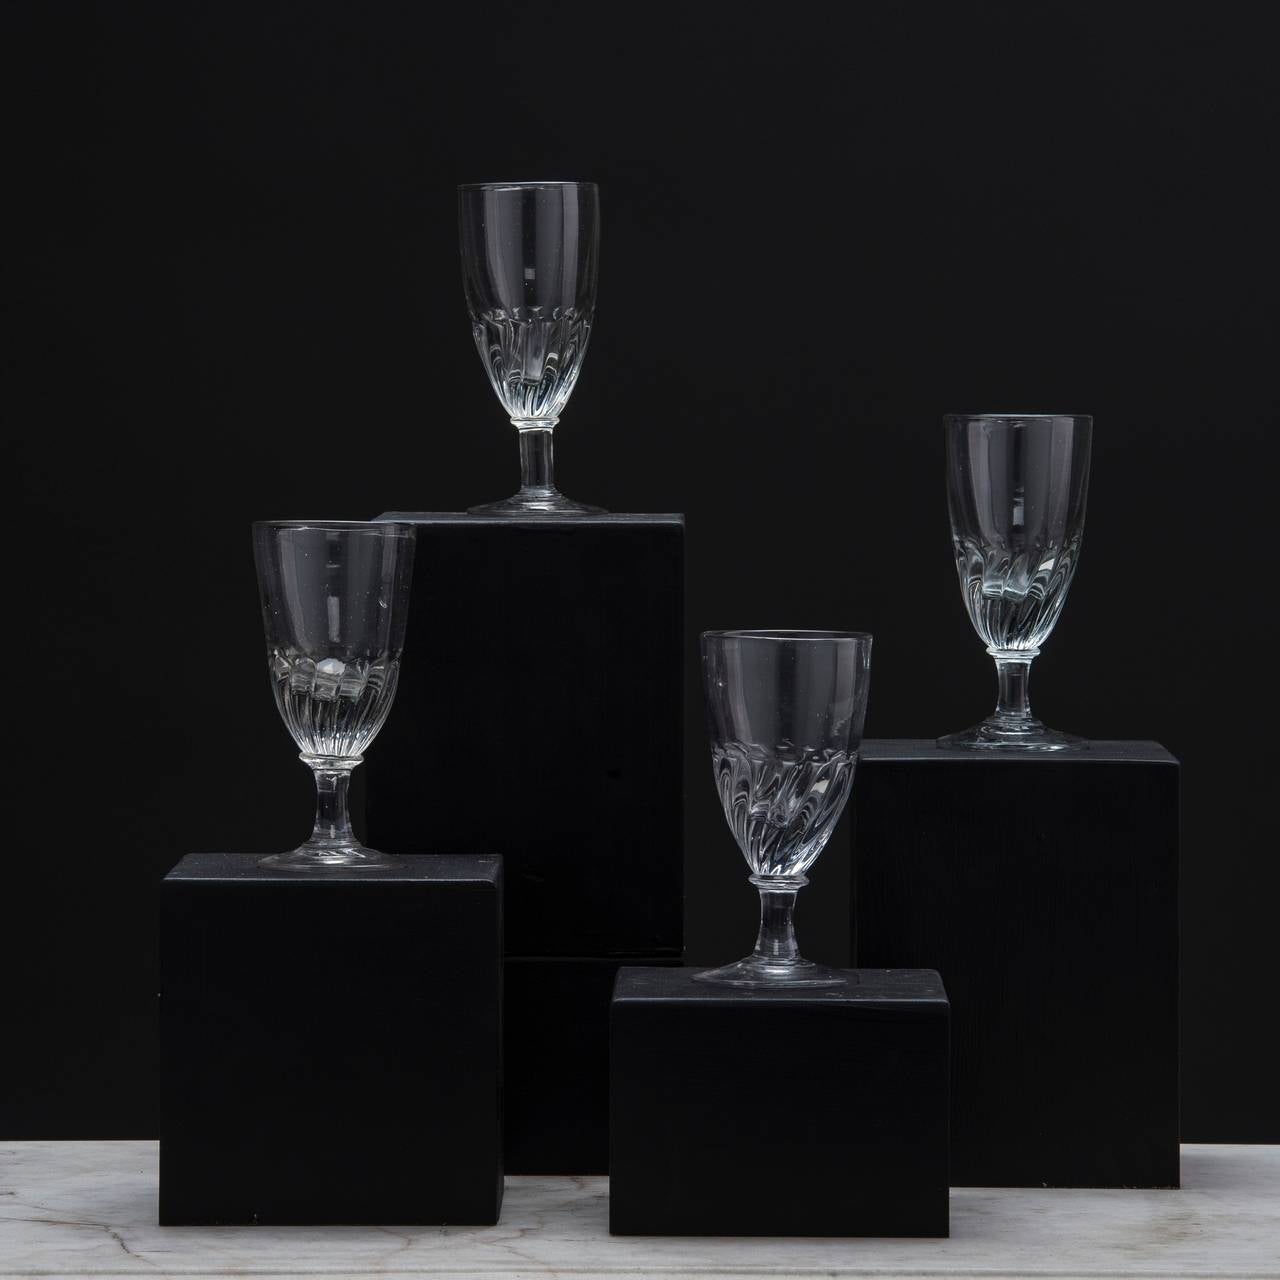 French bistro glasses about 1900. 
80 USD per piece. Sizes can vary a little bit.